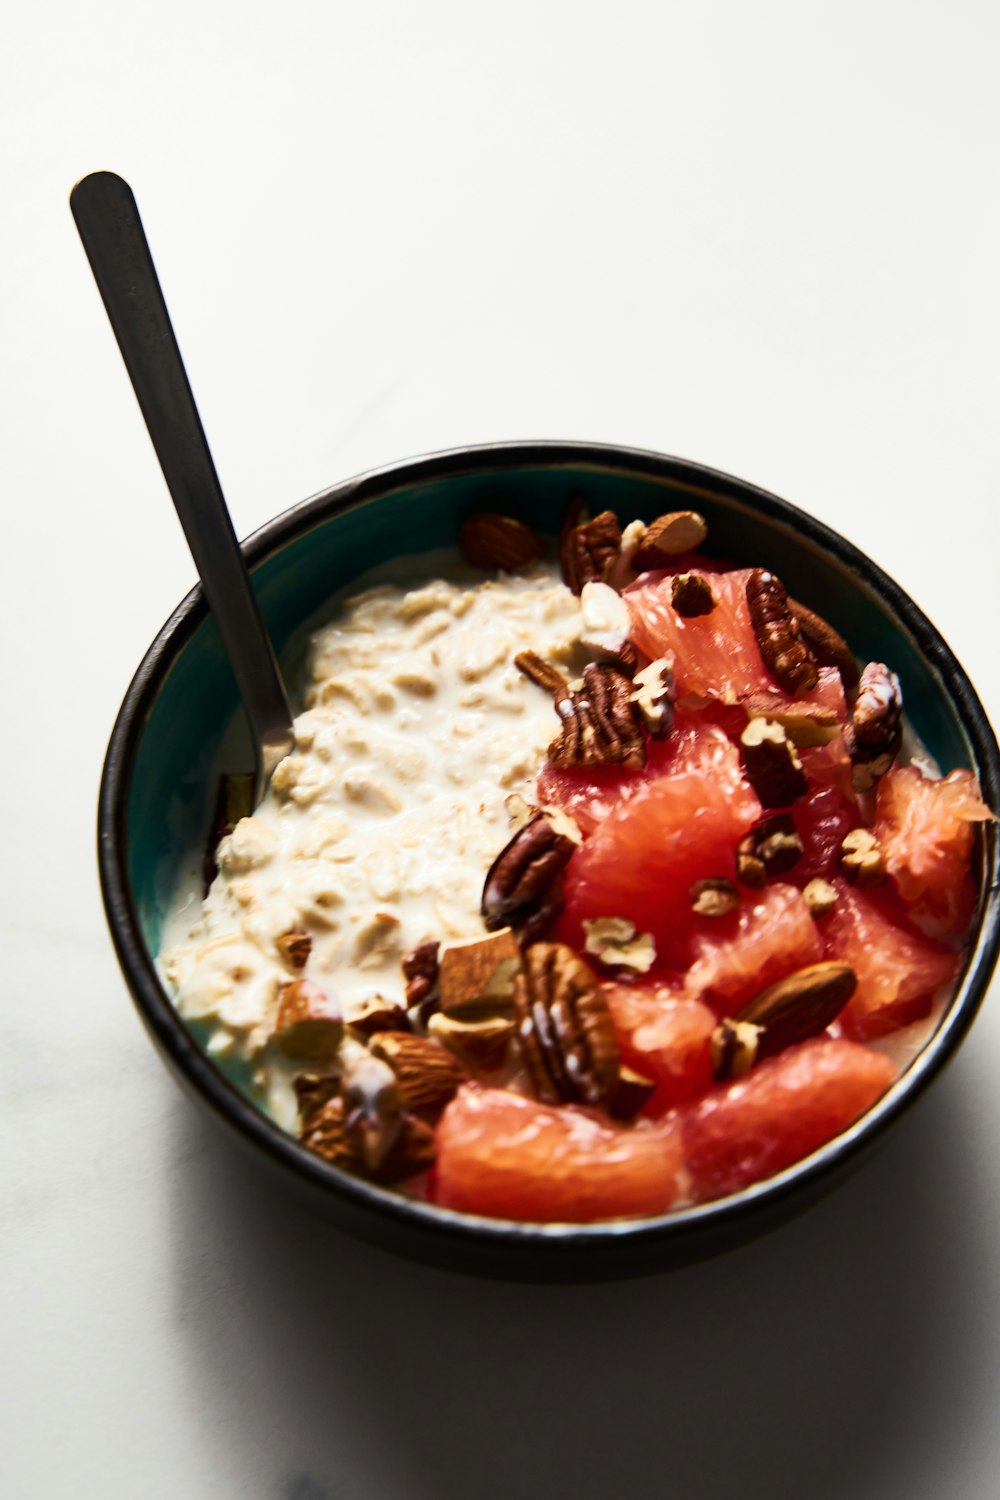 a bowl of oatmeal with fruit and nuts